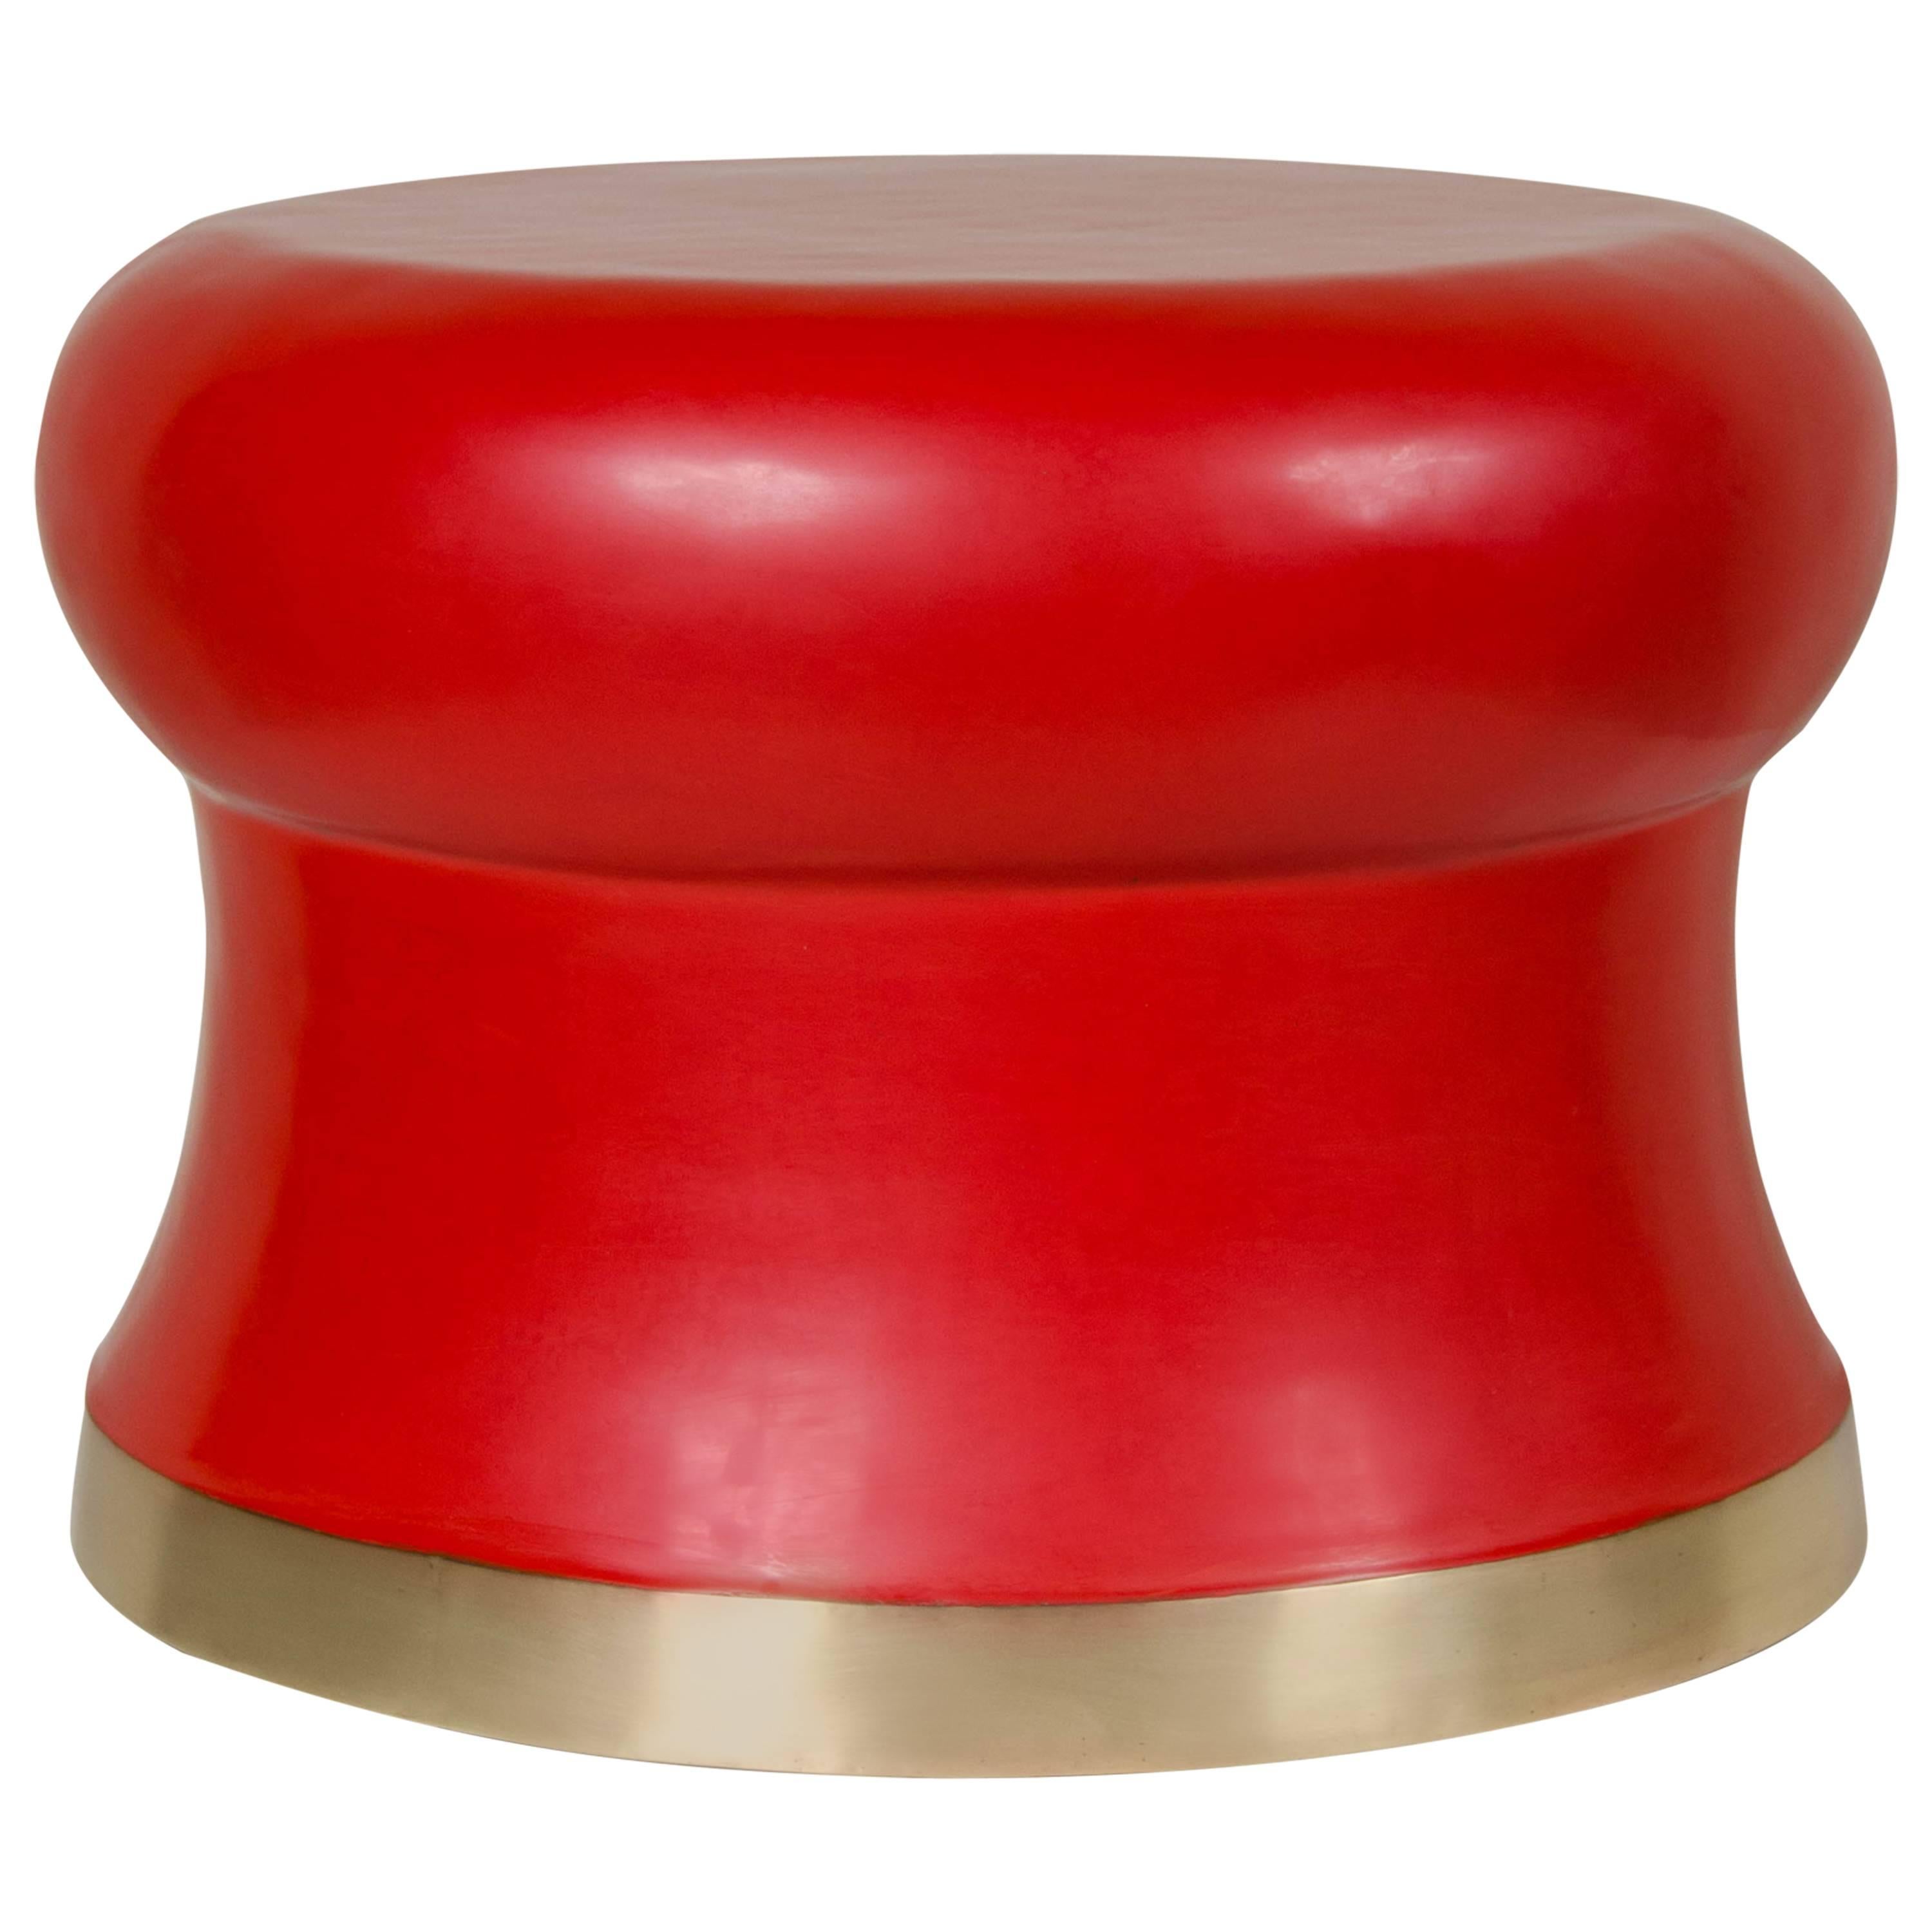 Dian Drum Stool with Brass Trim, Red Lacquer, Limited Edition